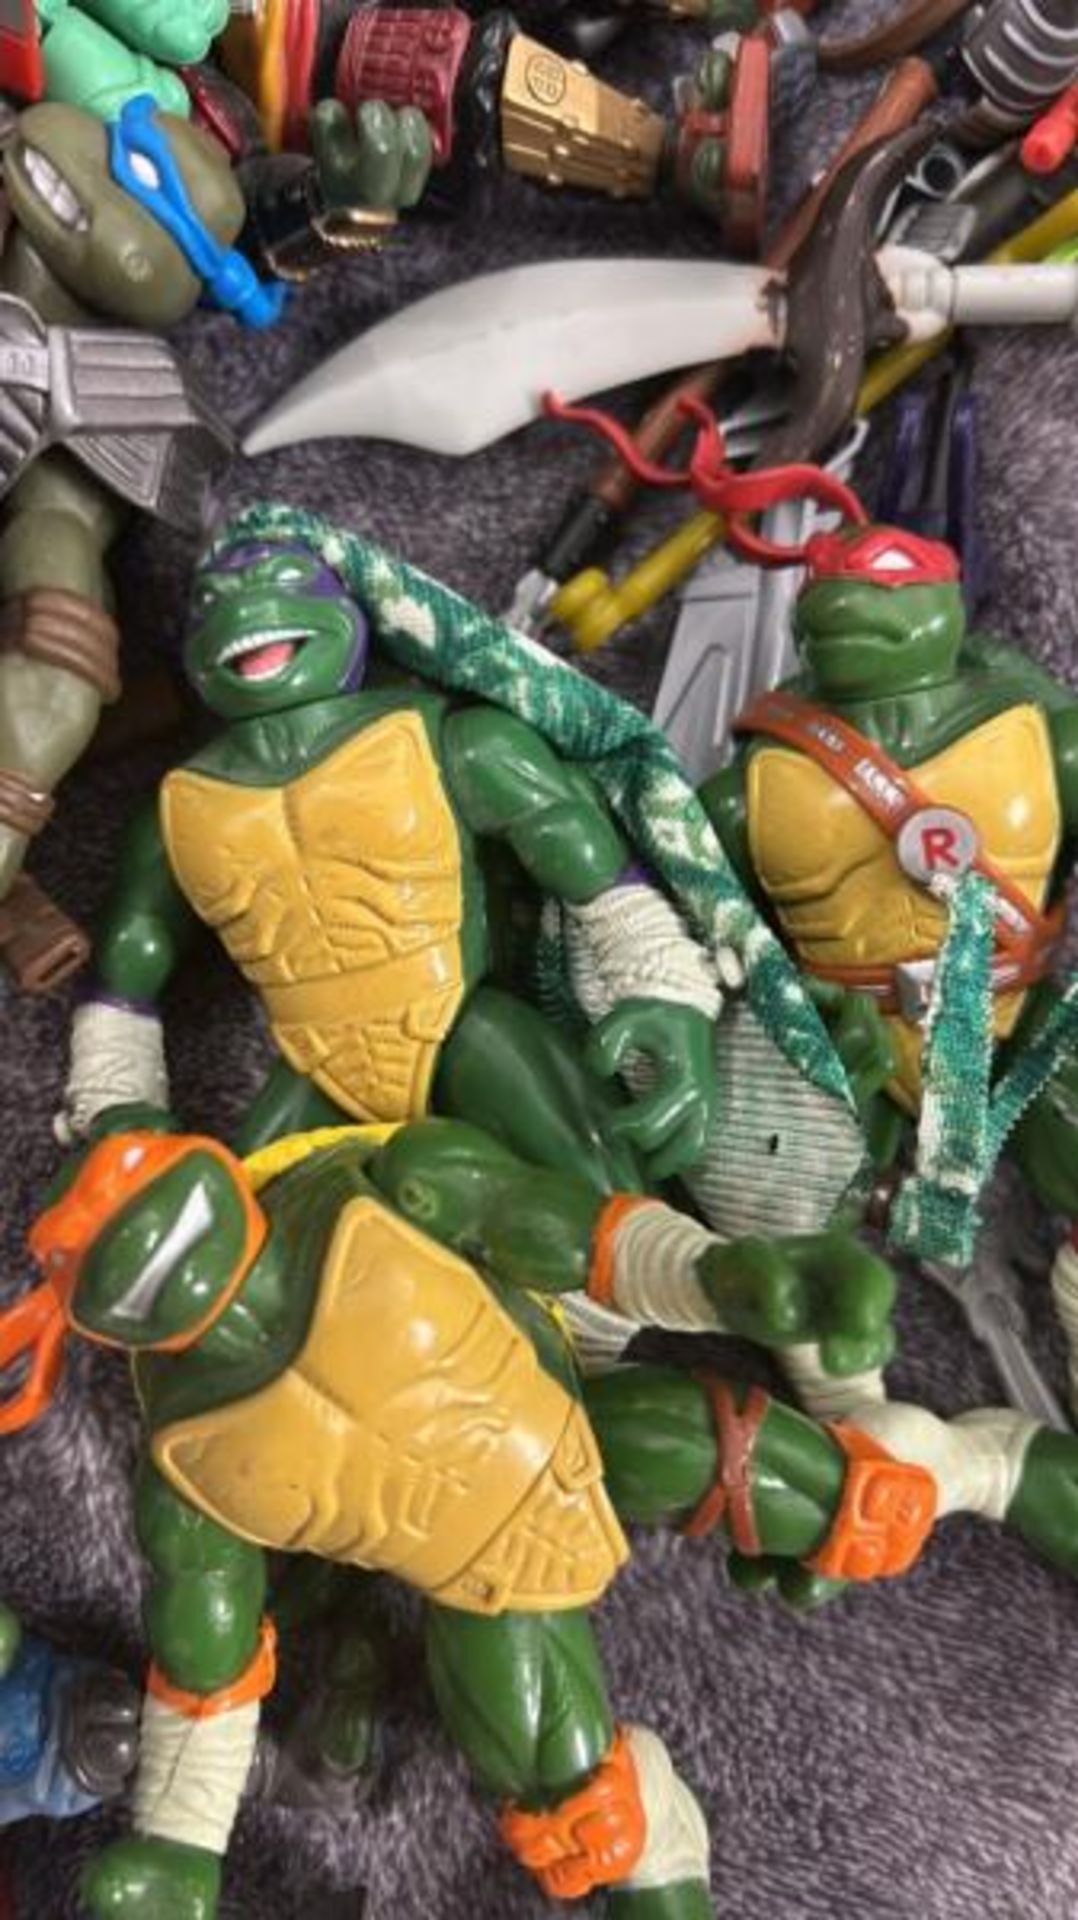 Teenage Mutant Ninja Turtles - Assorted loose figures including some based on the movie versions and - Image 6 of 13